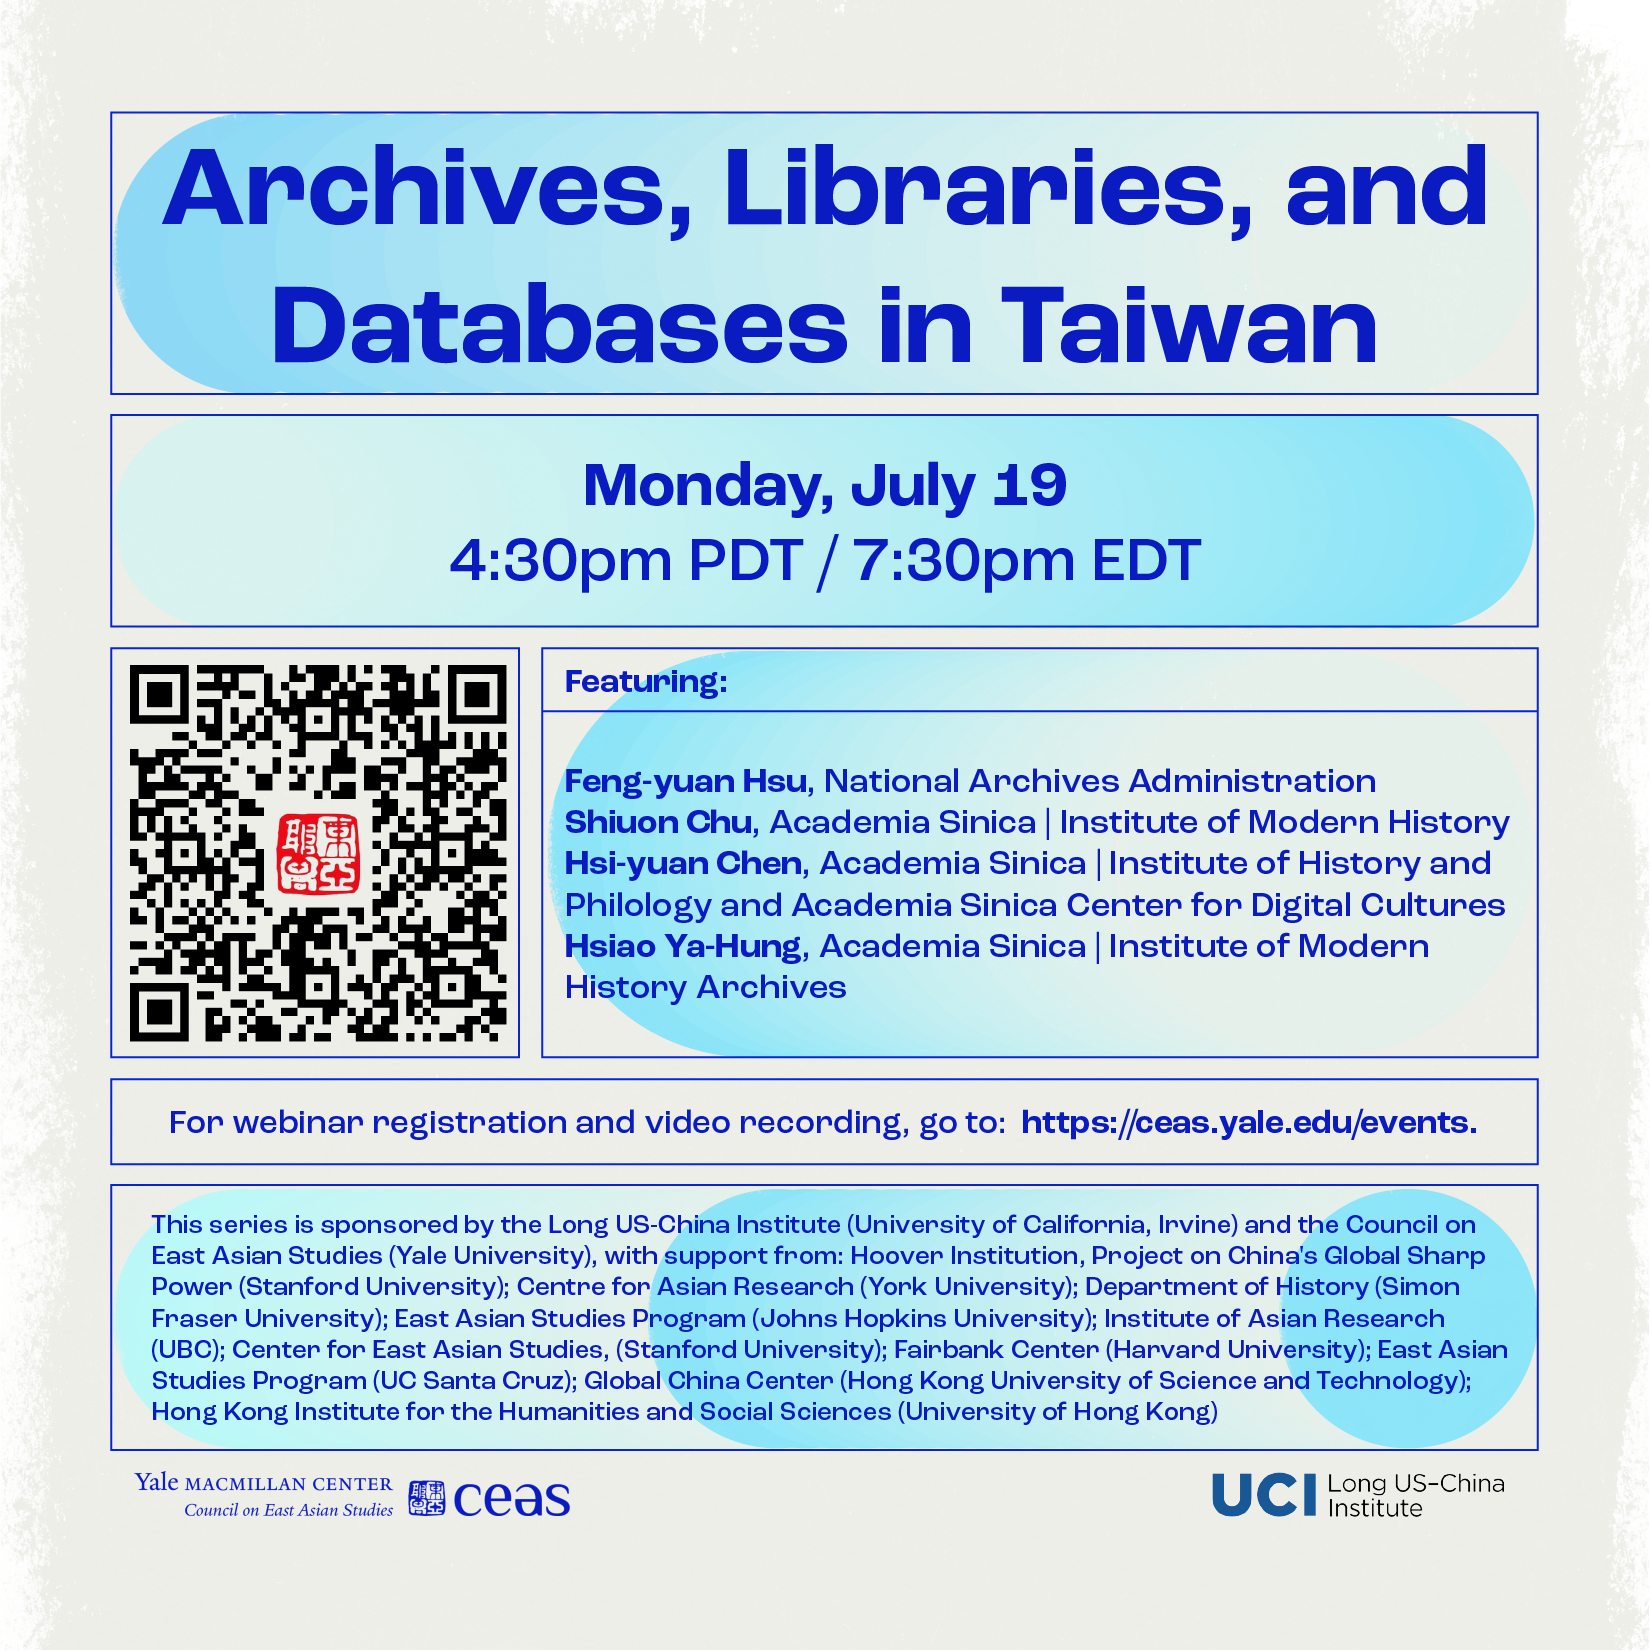 Doing Chinese History (in a New Era) Webinar Series on “Archives, Libraries, and Databases in Taiwan” (July 19, 2021)